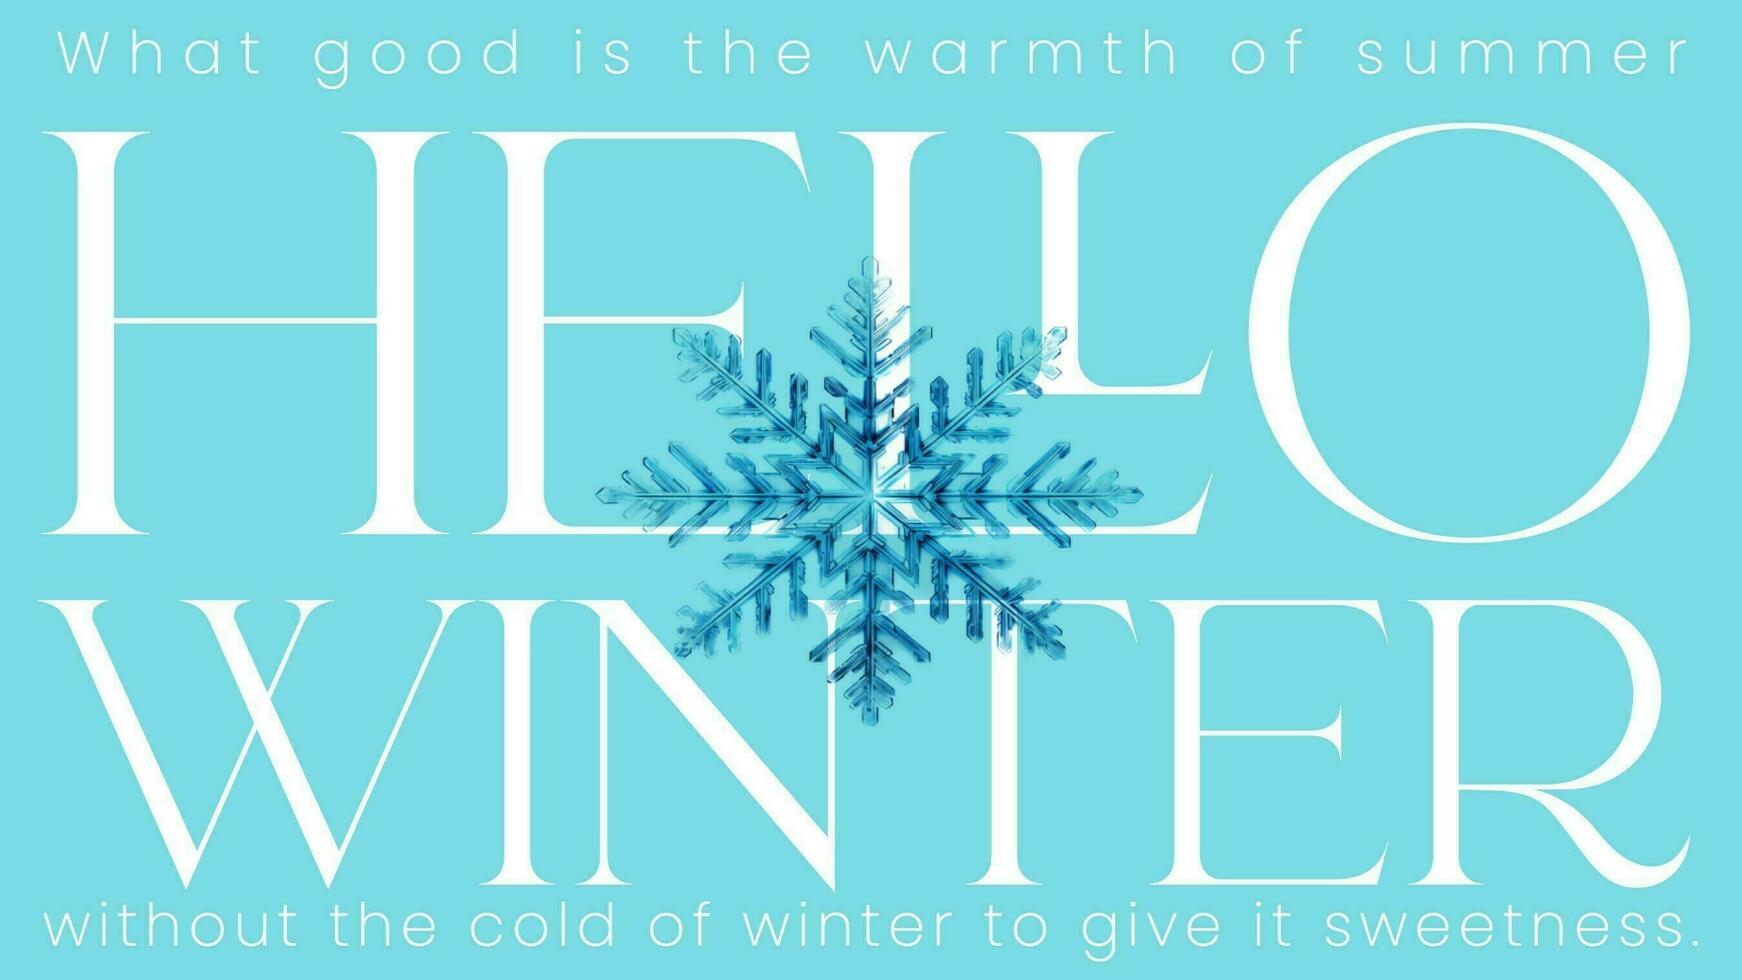 Hello Winter Text Quote for Twitter Post template